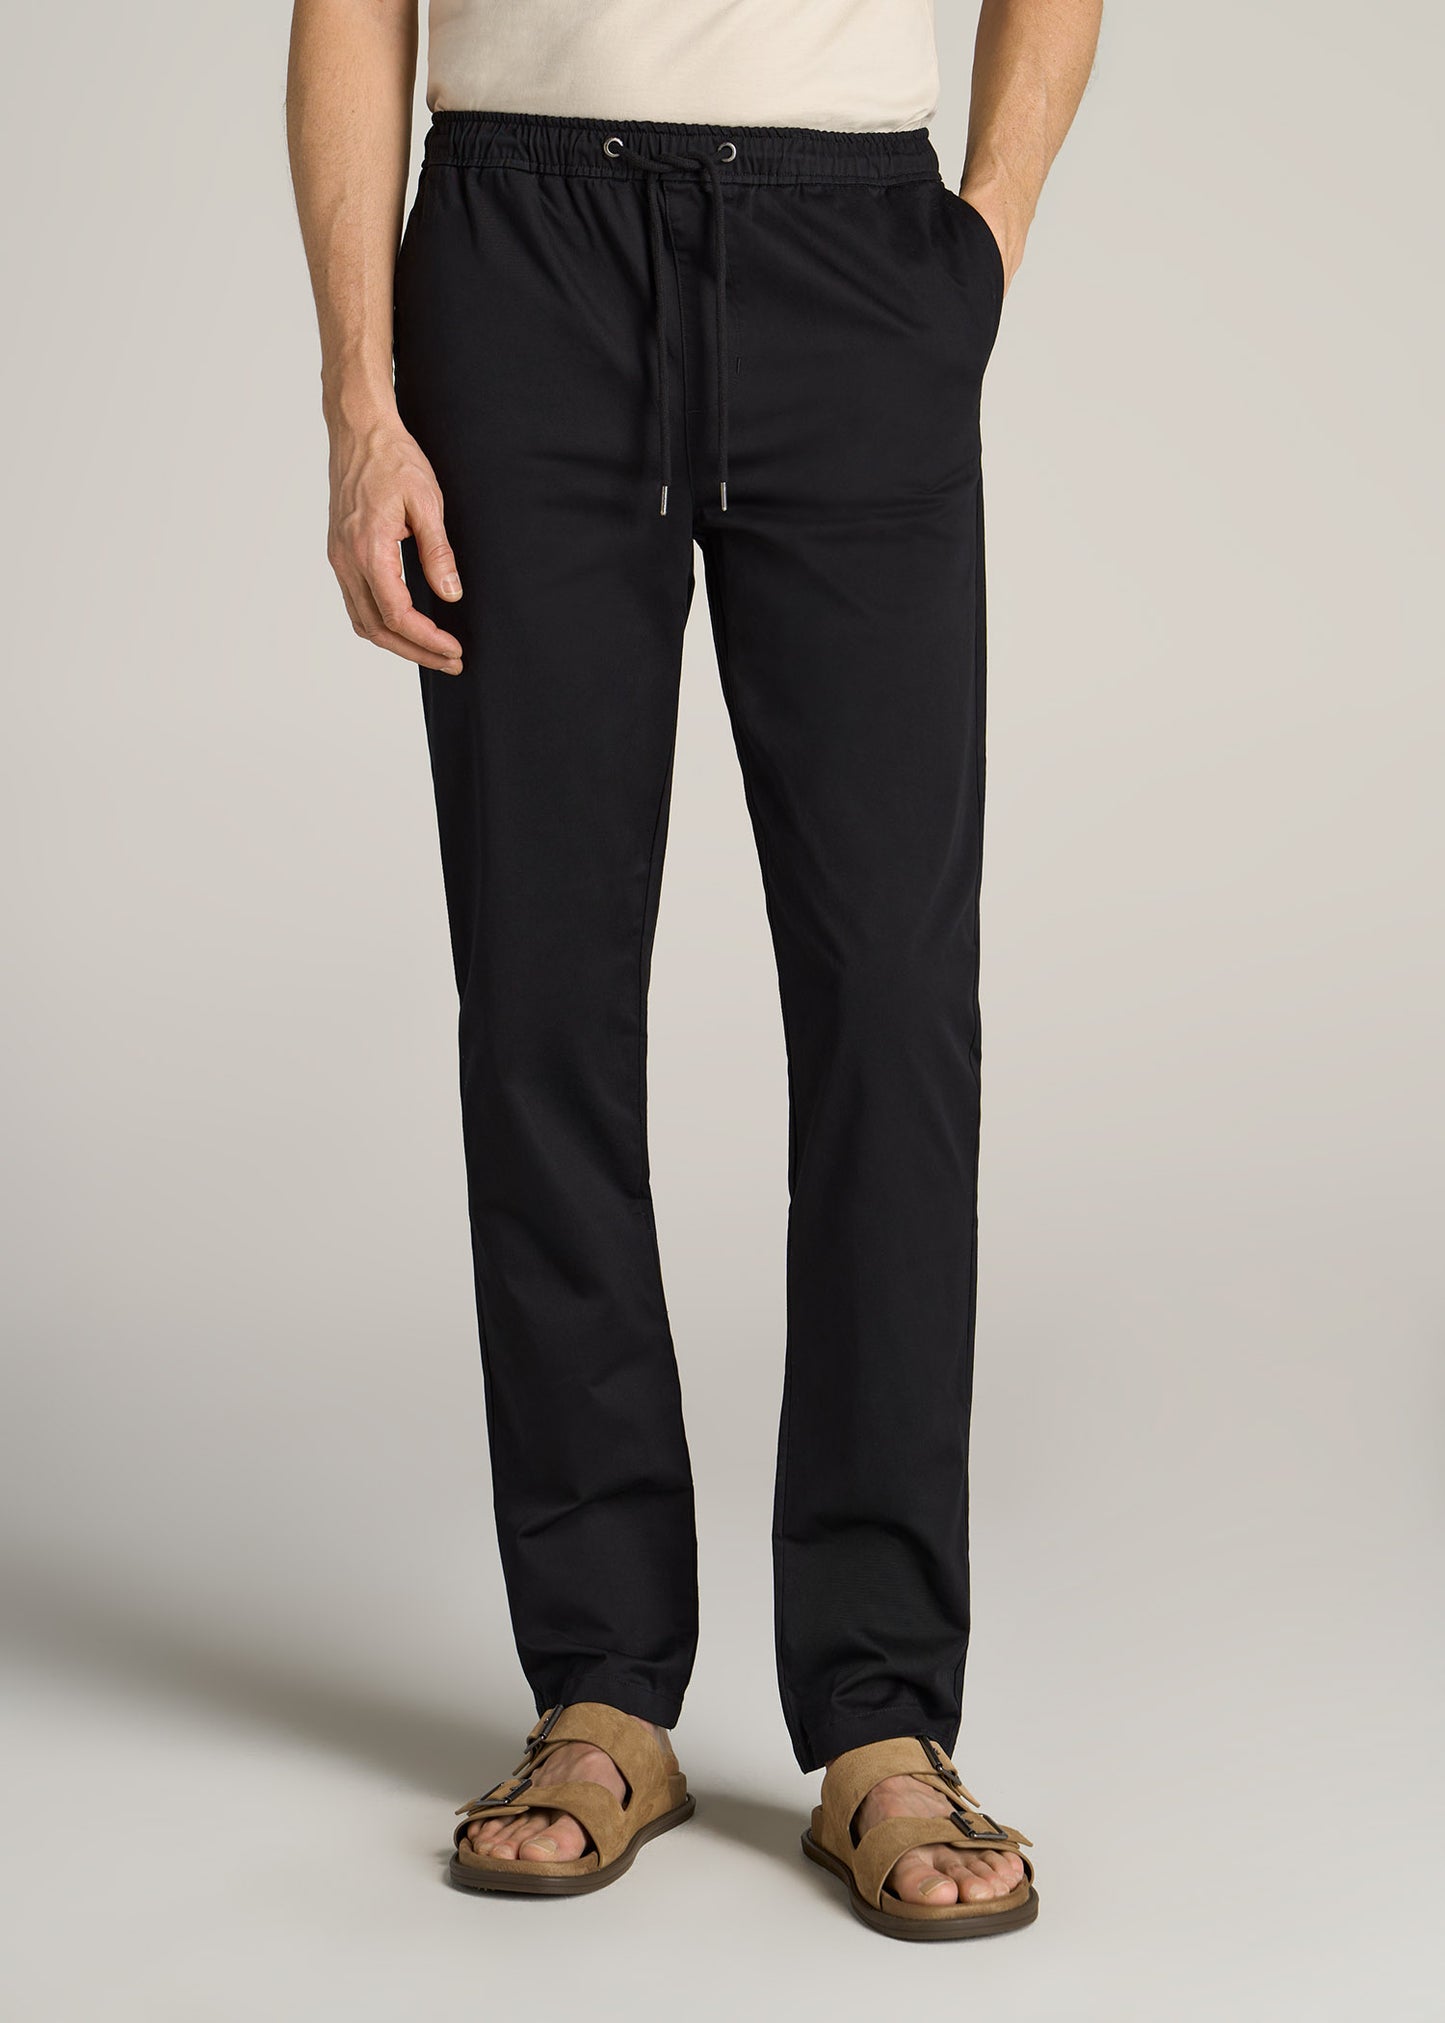 American-Tall-Men-Pull-On-Deck-Stretch-Pants-Black-front